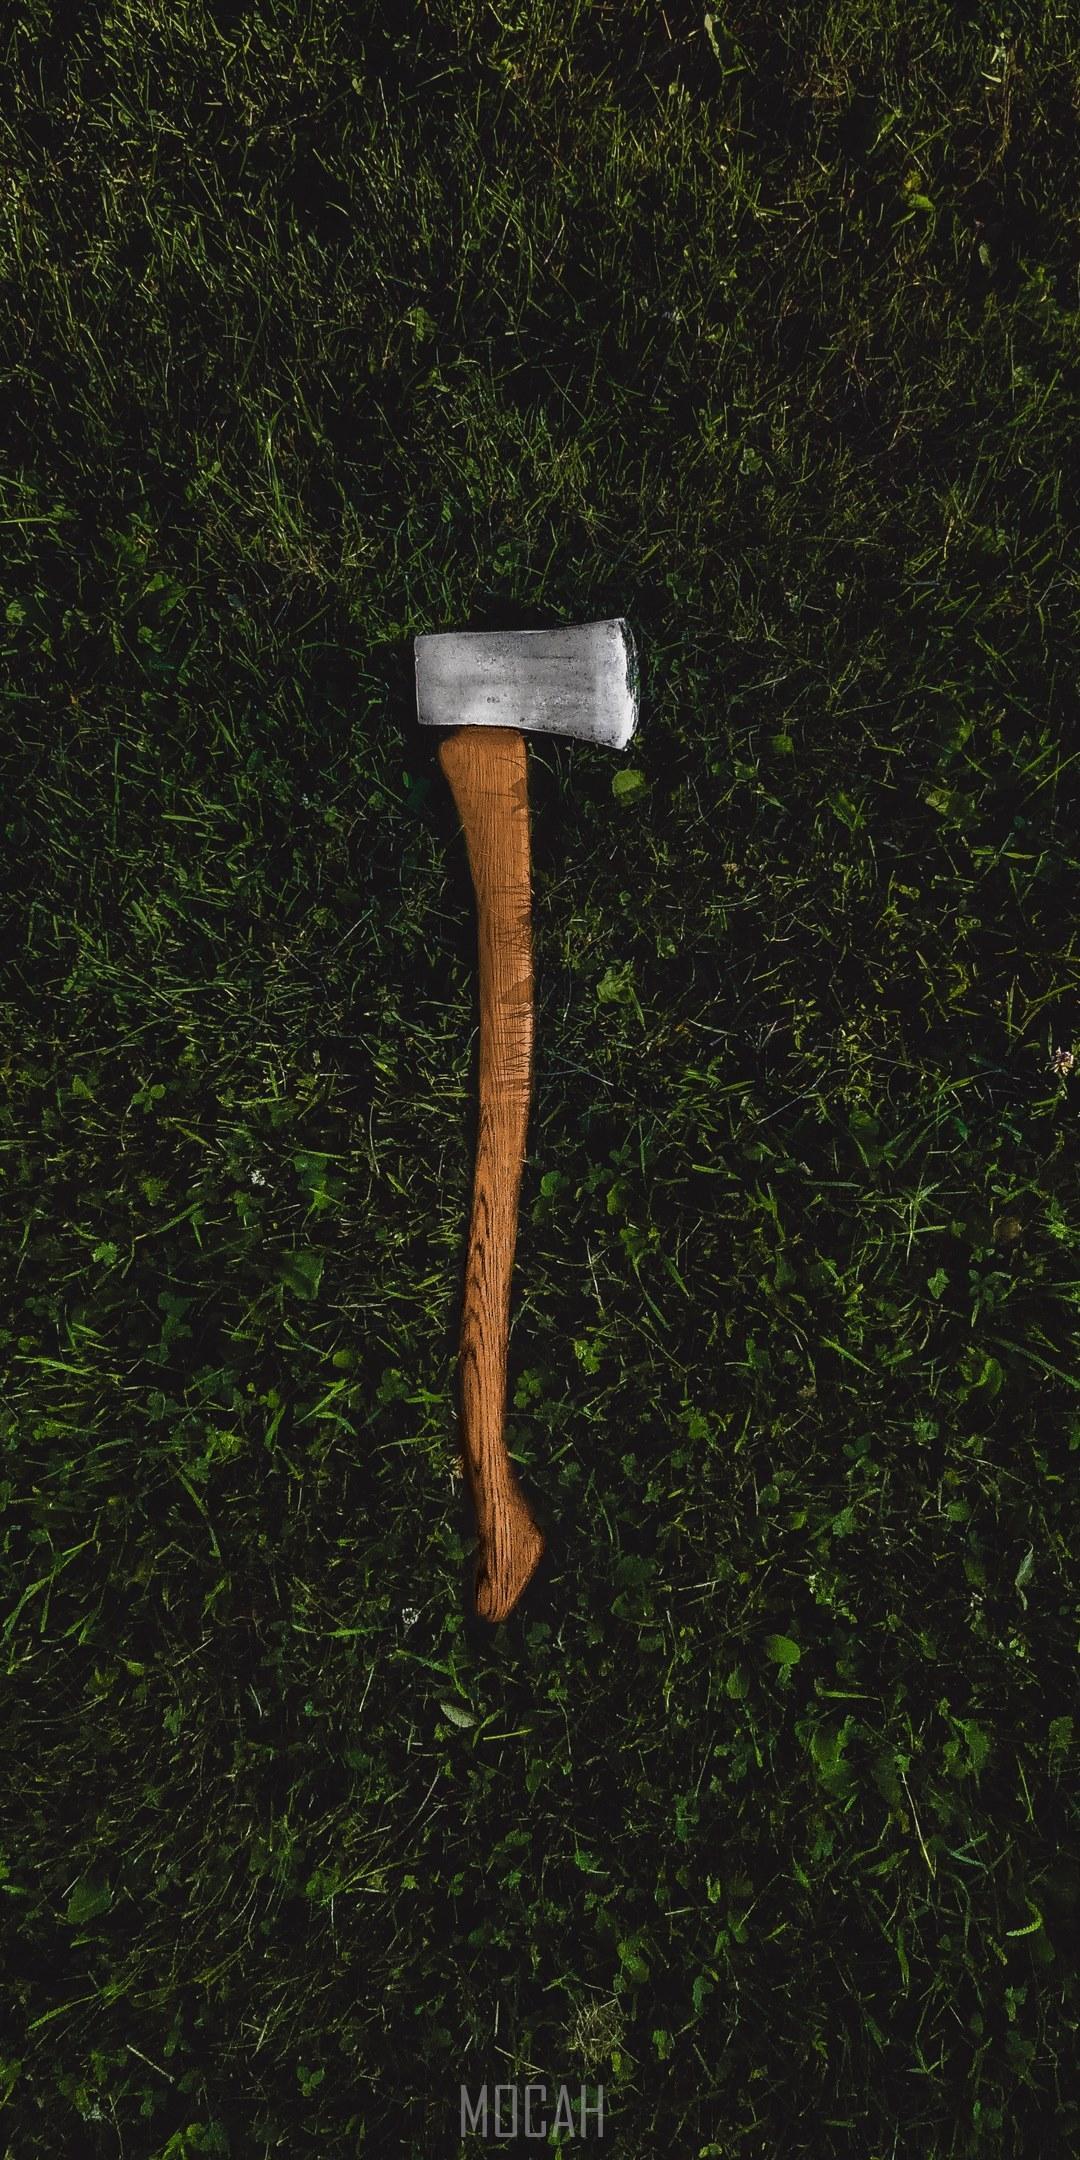 HD wallpaper, 1080X2160, A Cut Above, A Metal Ax With A Wooden Handle Laid Down In The Middle Of A Grassy Ground